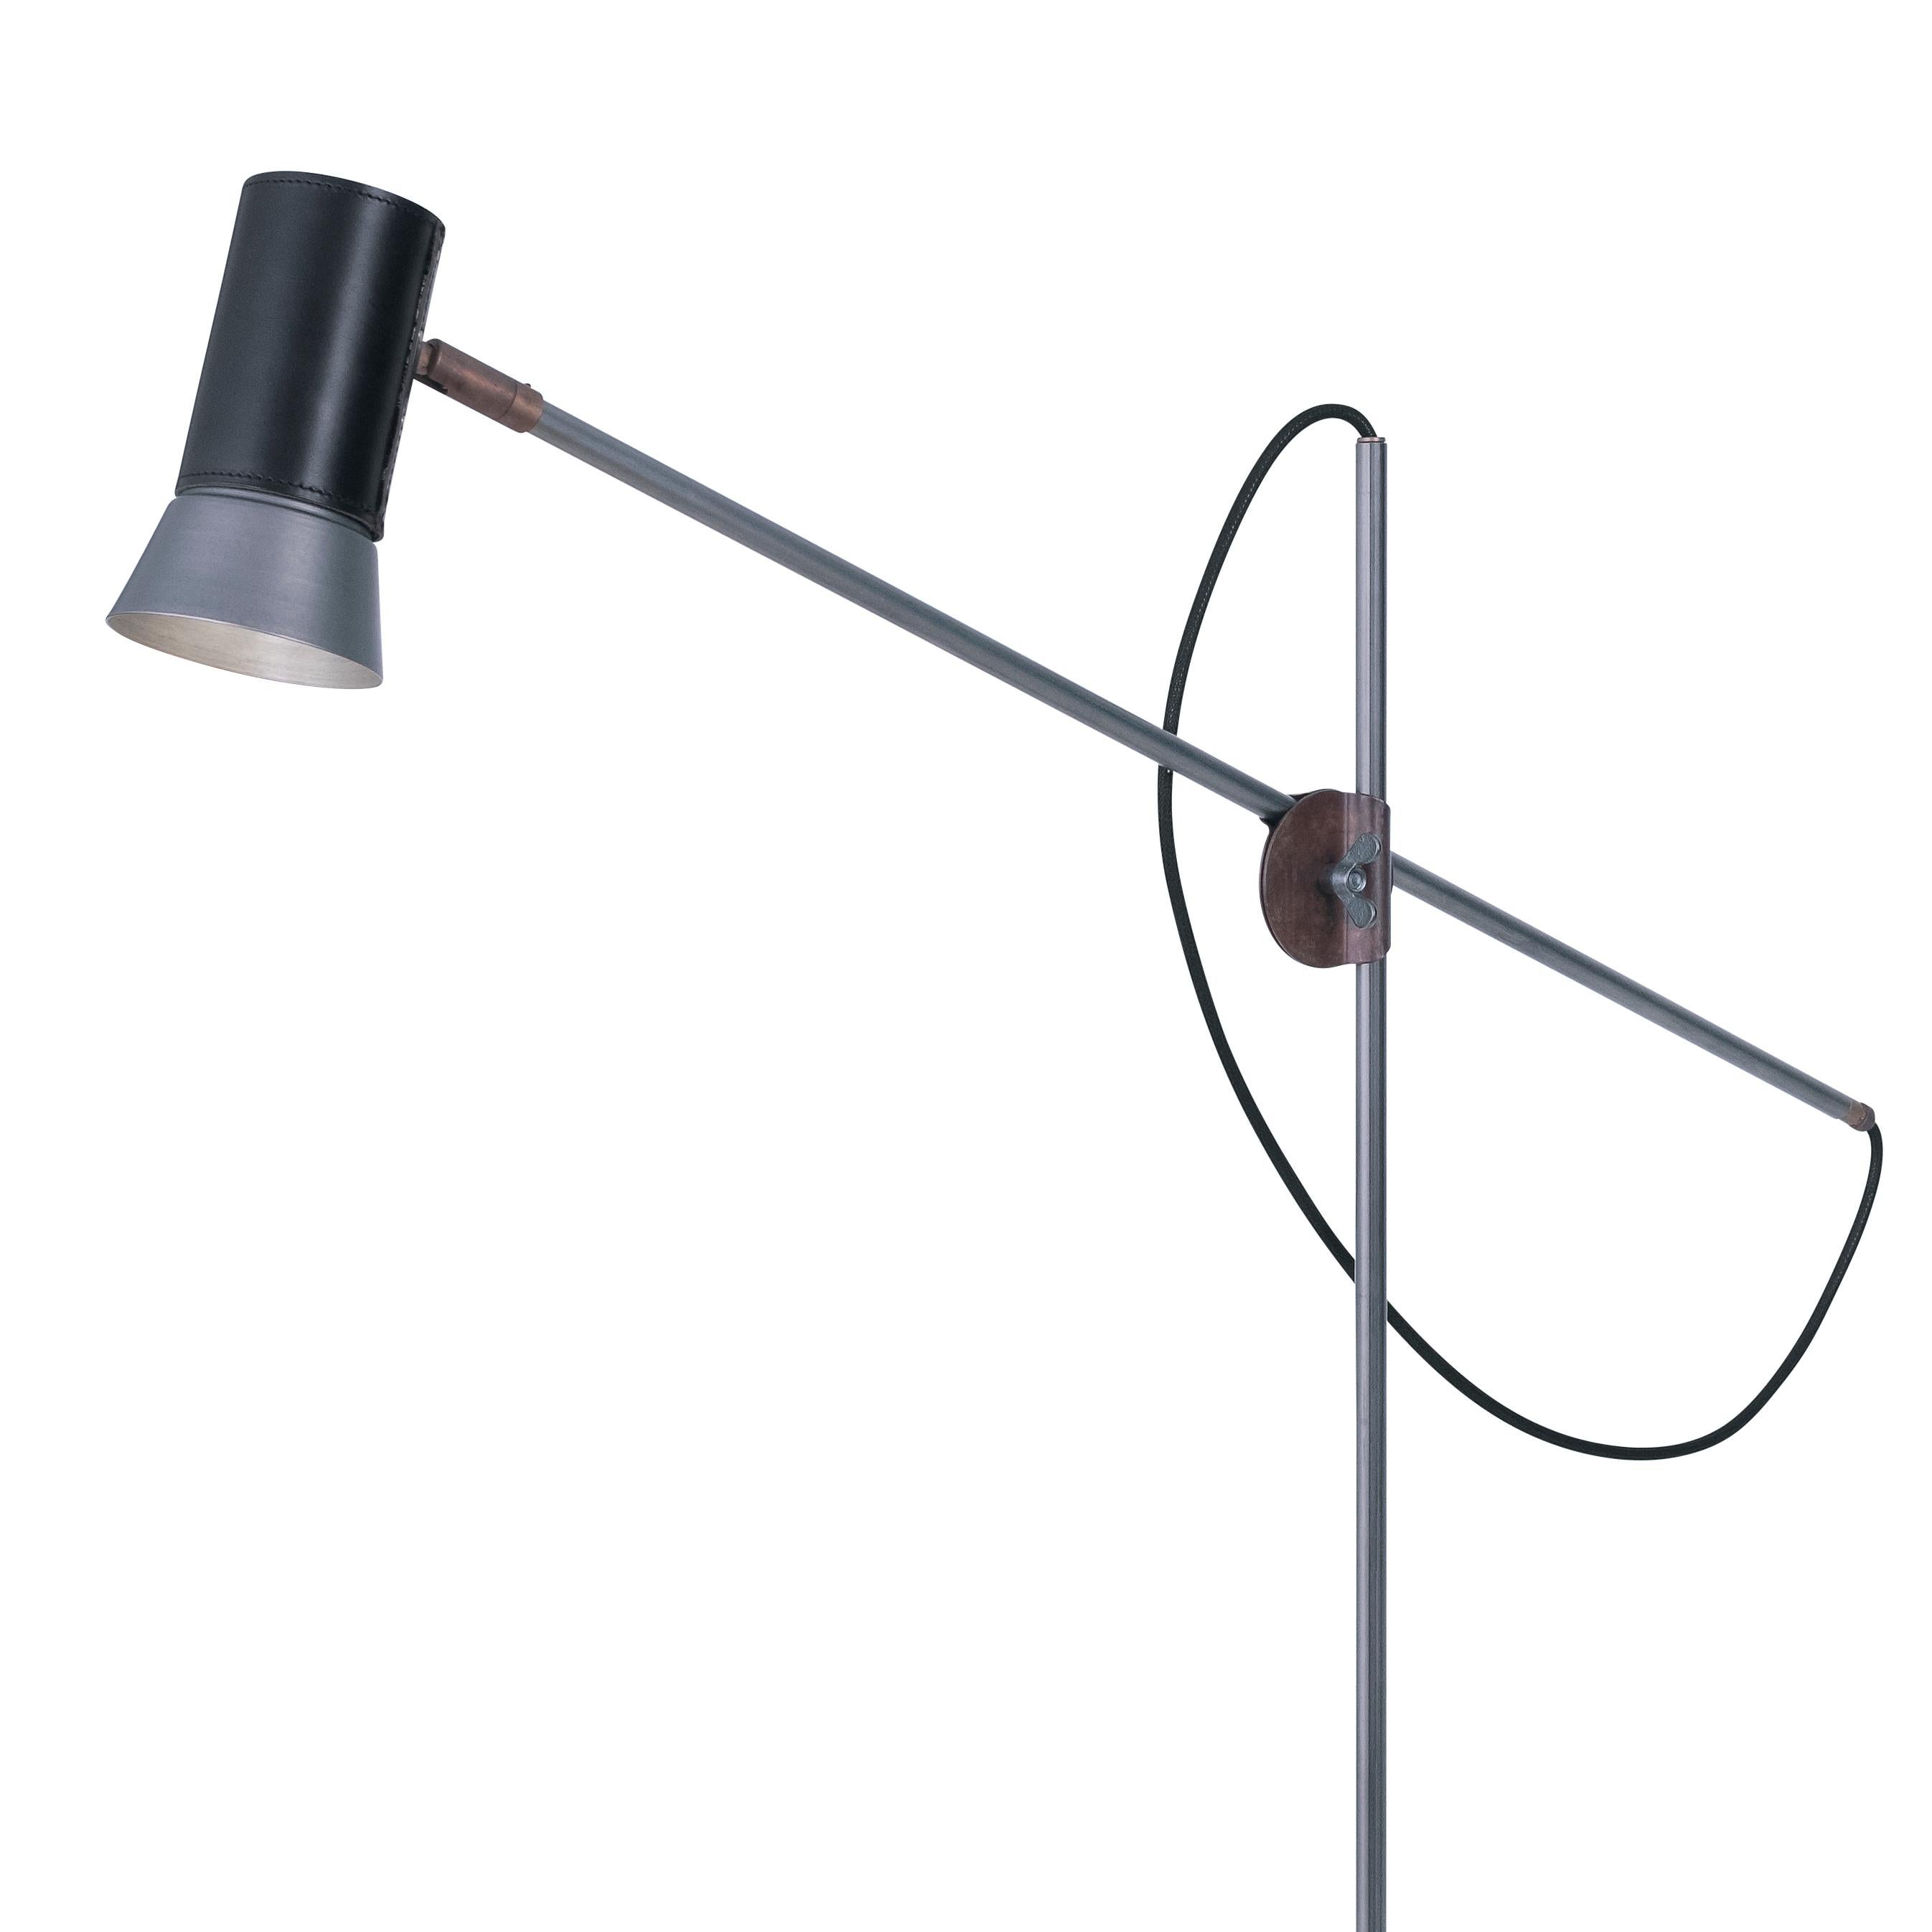 Floor lamp model Kusk designed by Sabina Grubbeson and manufactured by Konsthantverk.

The production of lamps, wall lights and floor lamps are manufactured using craftsman’s techniques with the same materials and techniques as the first